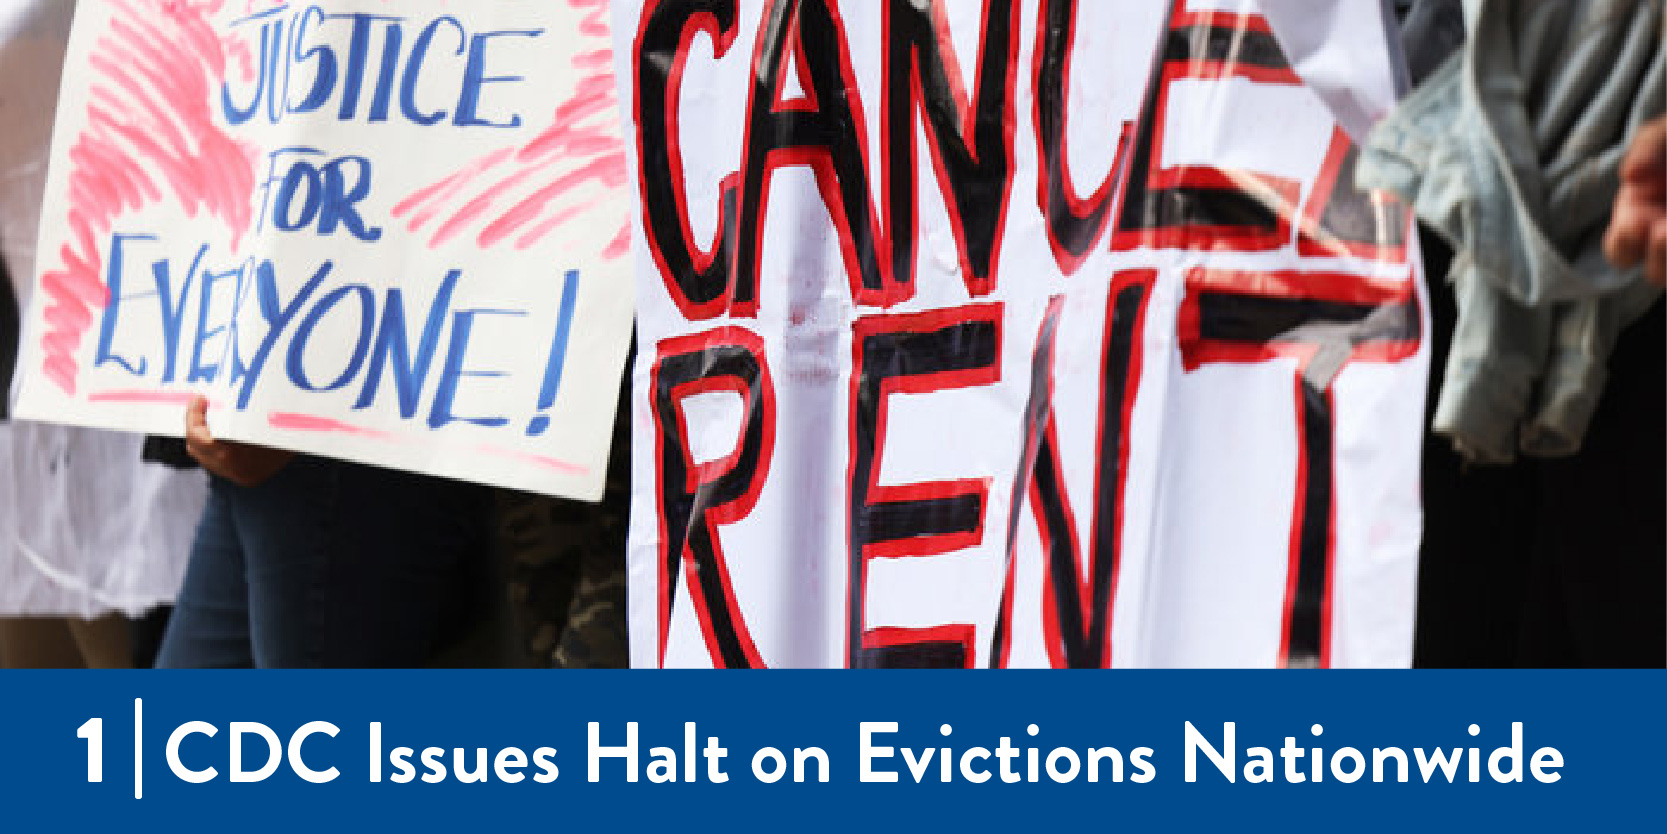 people protest against evictions